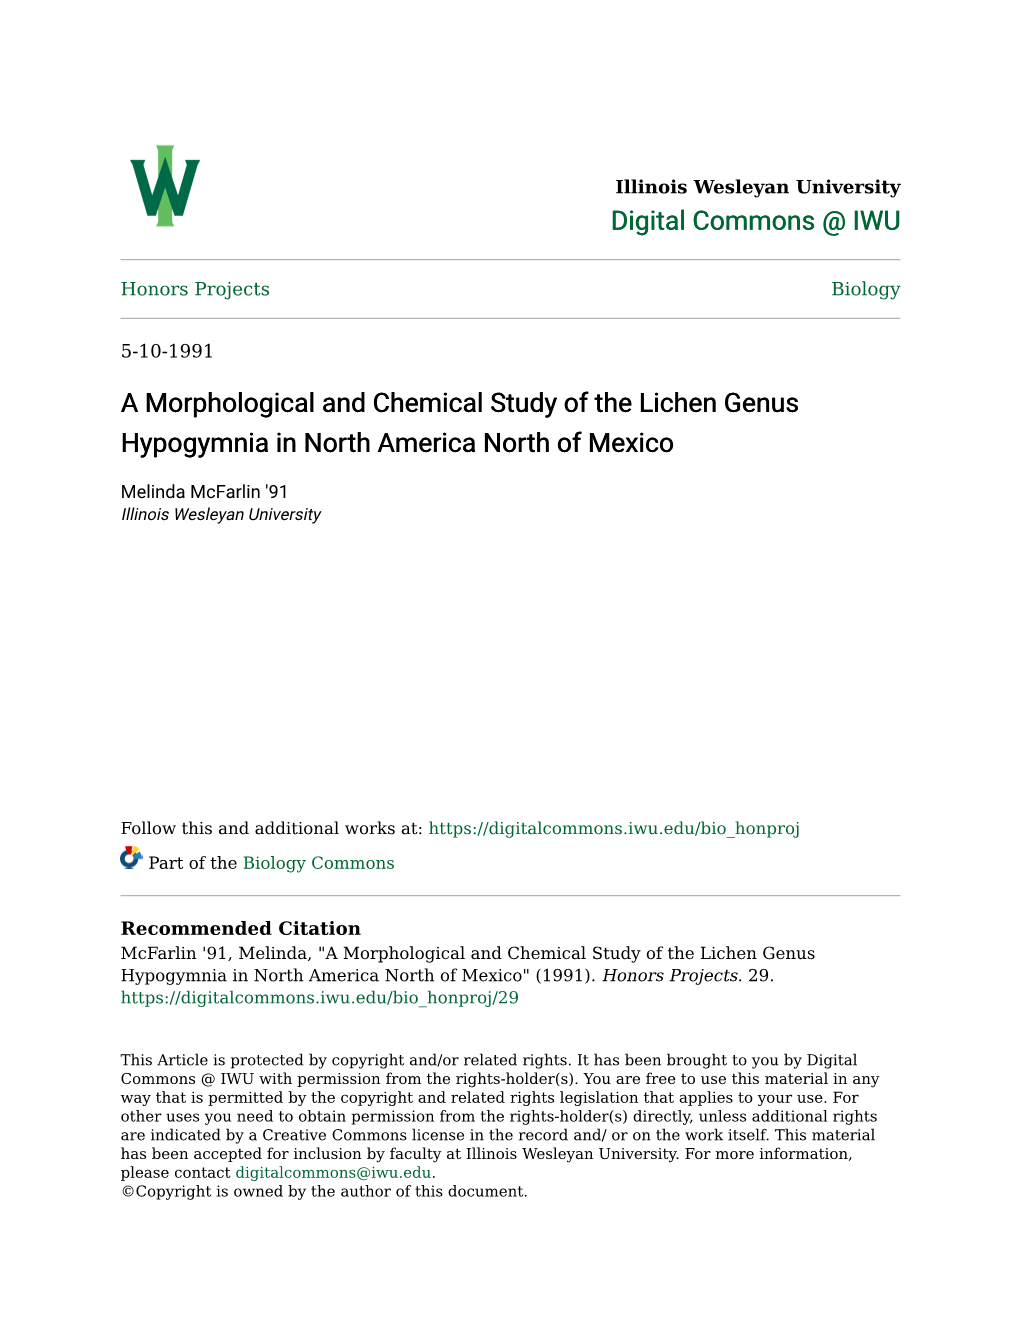 A Morphological and Chemical Study of the Lichen Genus Hypogymnia in North America North of Mexico